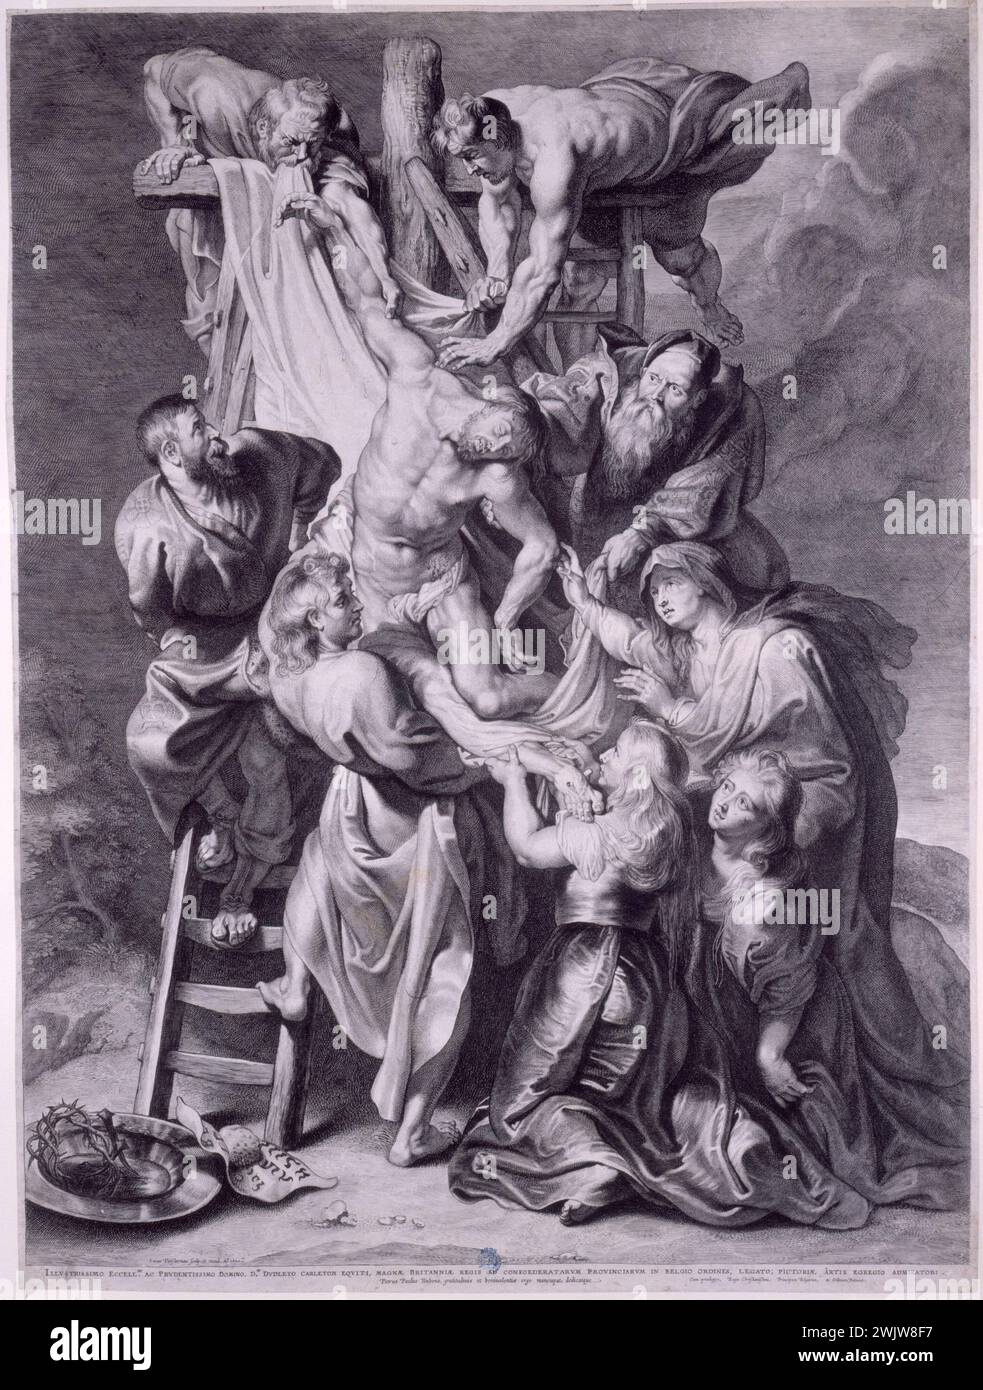 Lucas Vorsterman (1595-1675). 'La Grande Descent de Croix', engraving after the work of Pierre-Paul Rubens (1577-1640), preserved in the Cathedral of Notre-Dame d'Antvers. Museum of Fine Arts of the City of Paris, Petit Palais. 27019-19 Bible, corpse, Catholic, Christian Christian, Cross, Christ, Descent, Death, New Testament, Passion, Biblical scene Stock Photo